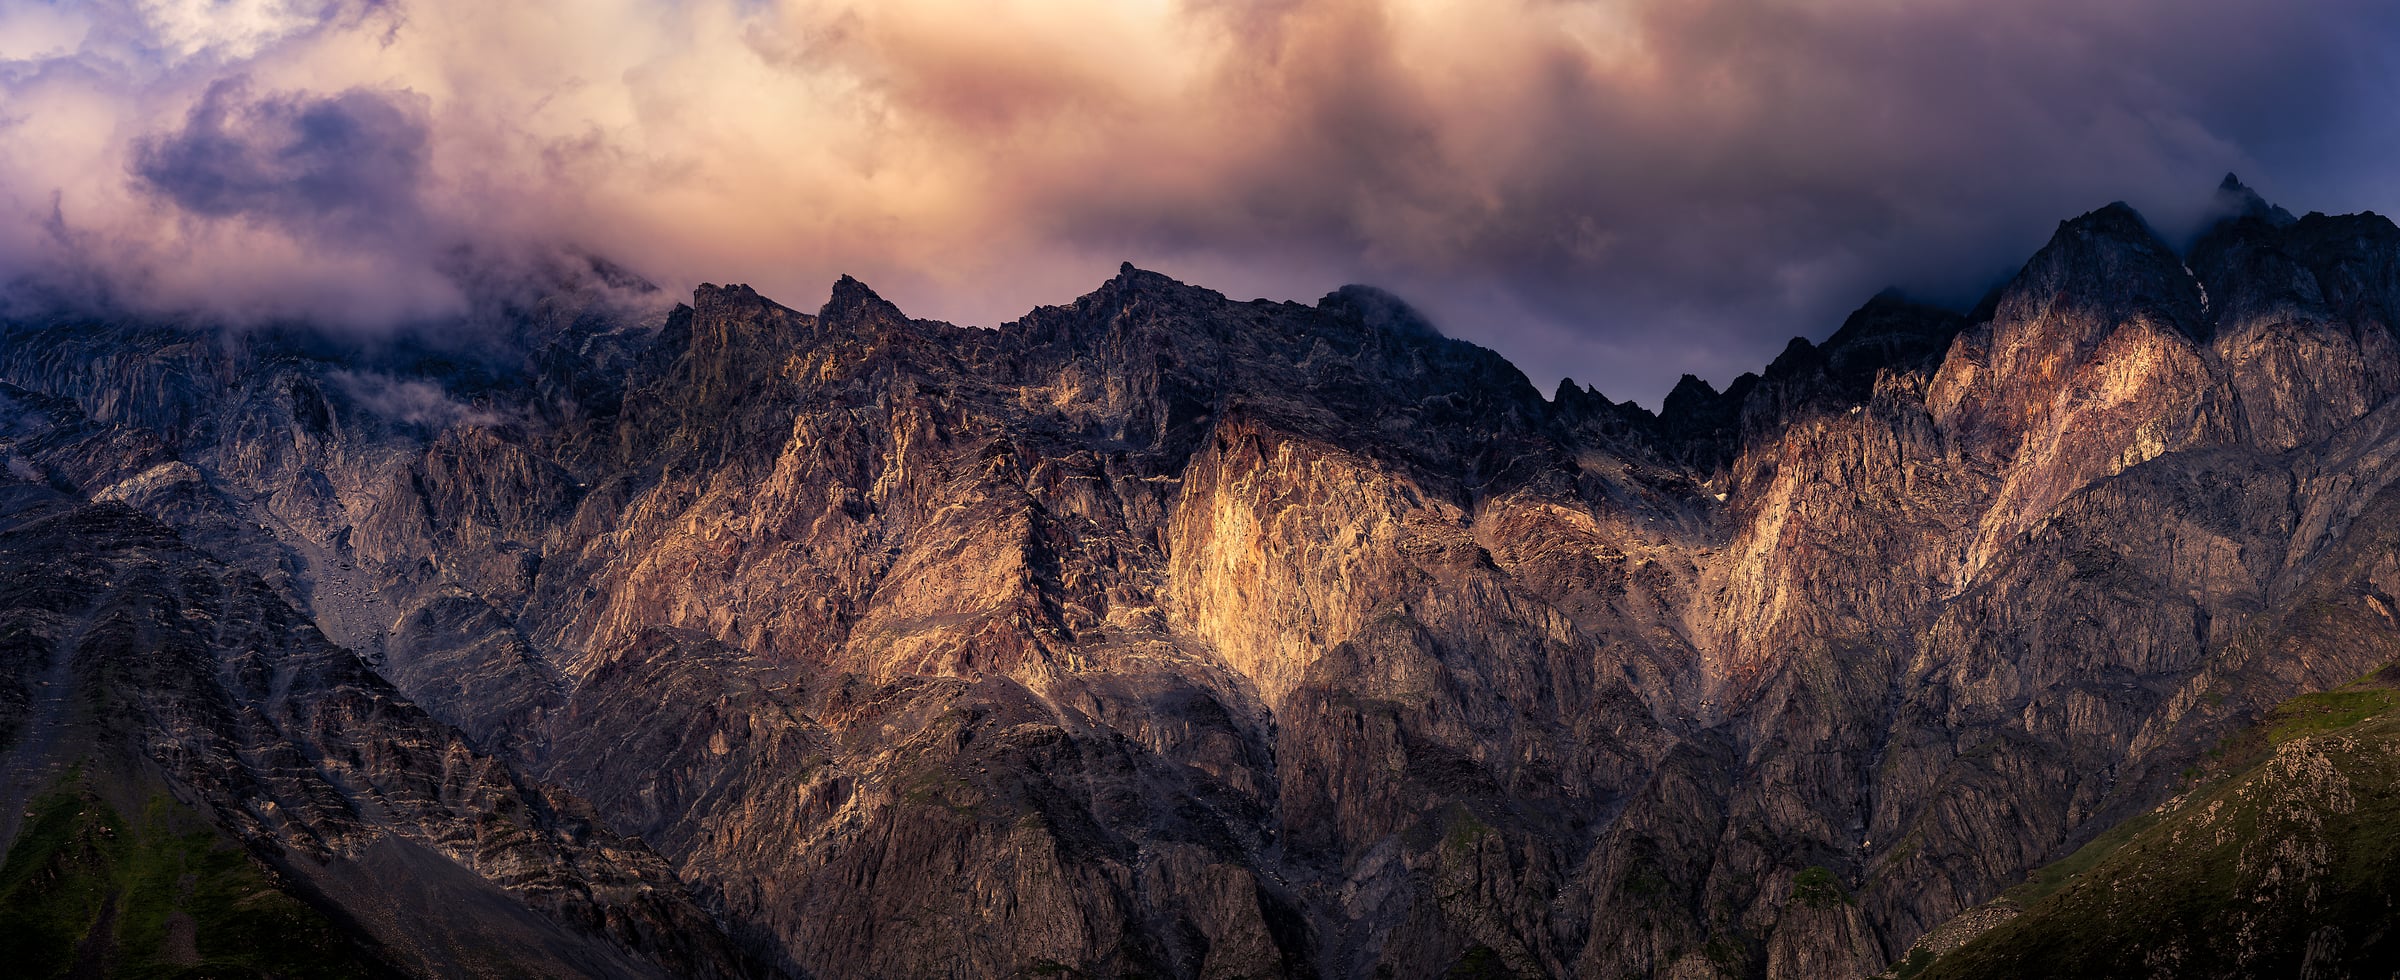 368 megapixels! A very high resolution, large-format VAST photo print of a mountain range at sunset; landscape photograph created by Francesco Emanuele Carucci in Stepantsminda, Georgia.